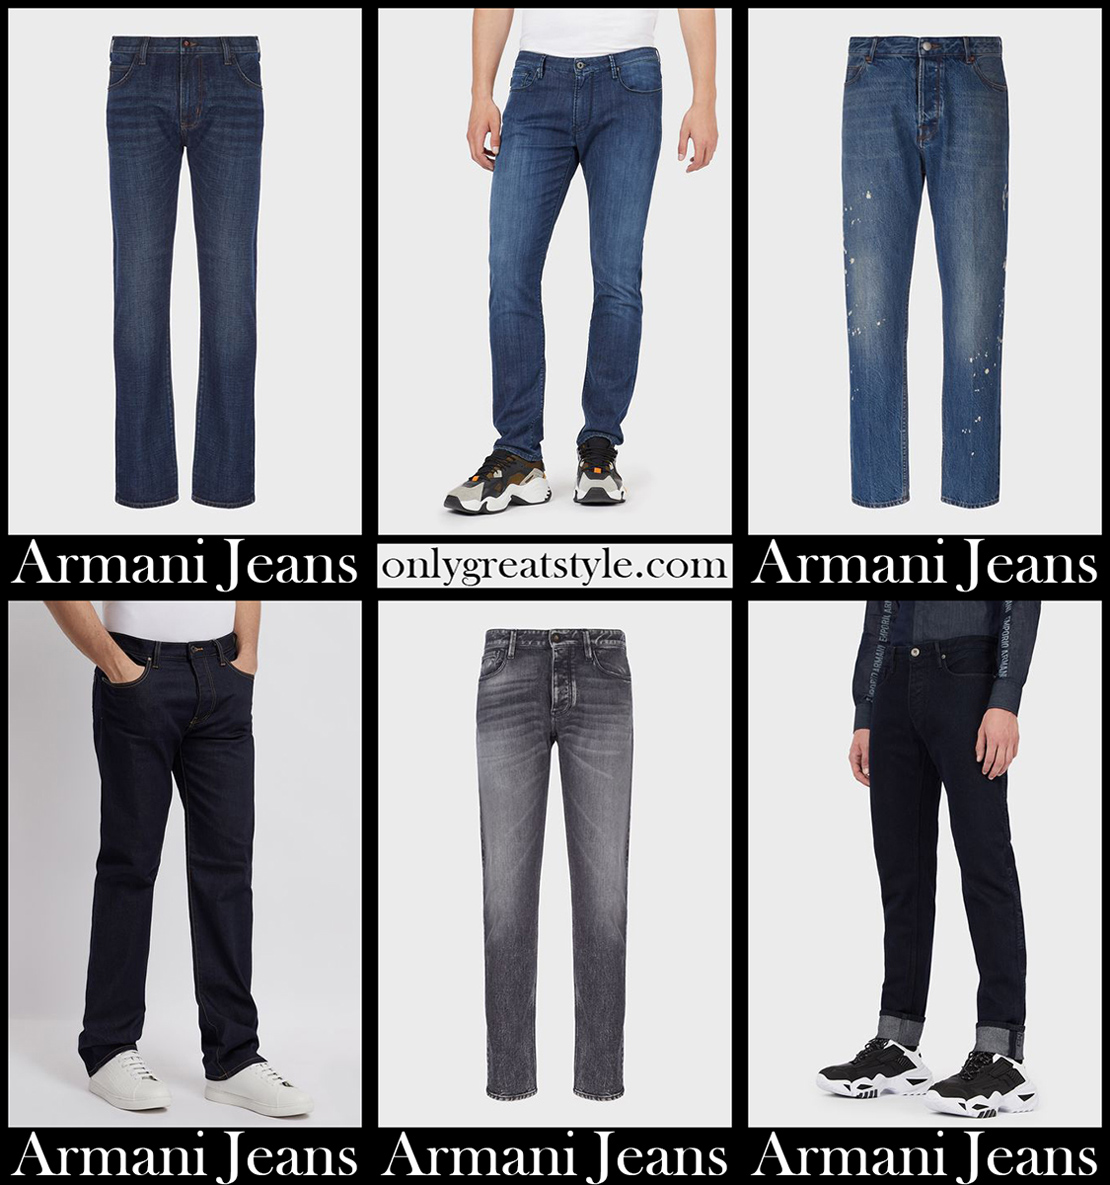 Armani jeans 2021 new arrivals mens clothing